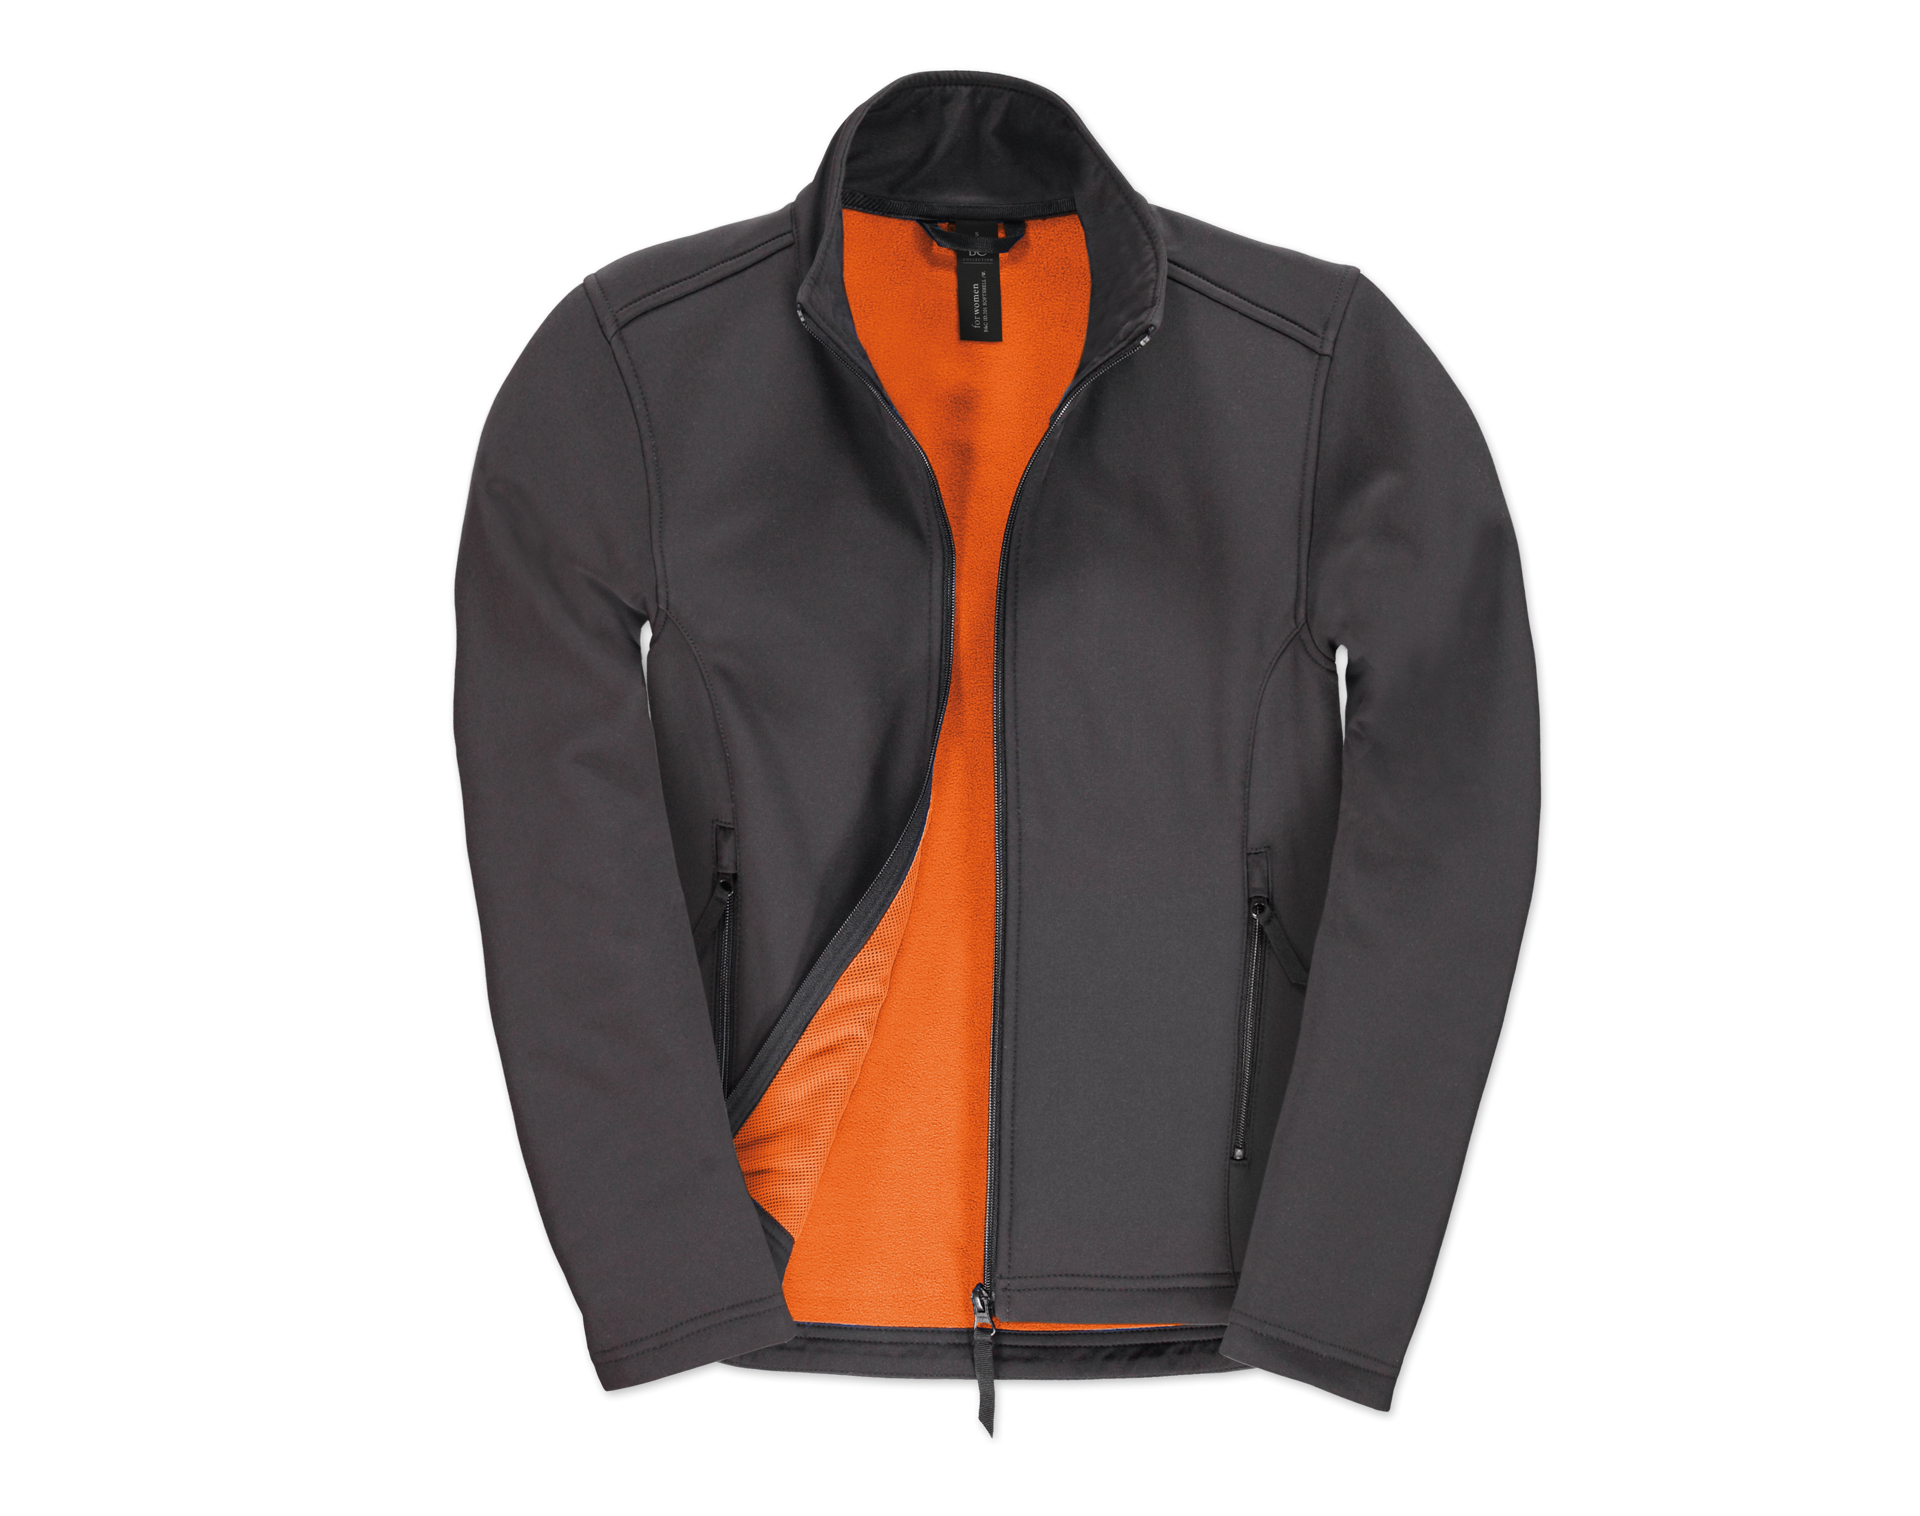 Womens ID 701 Softshell Jacket in grey with full front zip and orange inner fleece